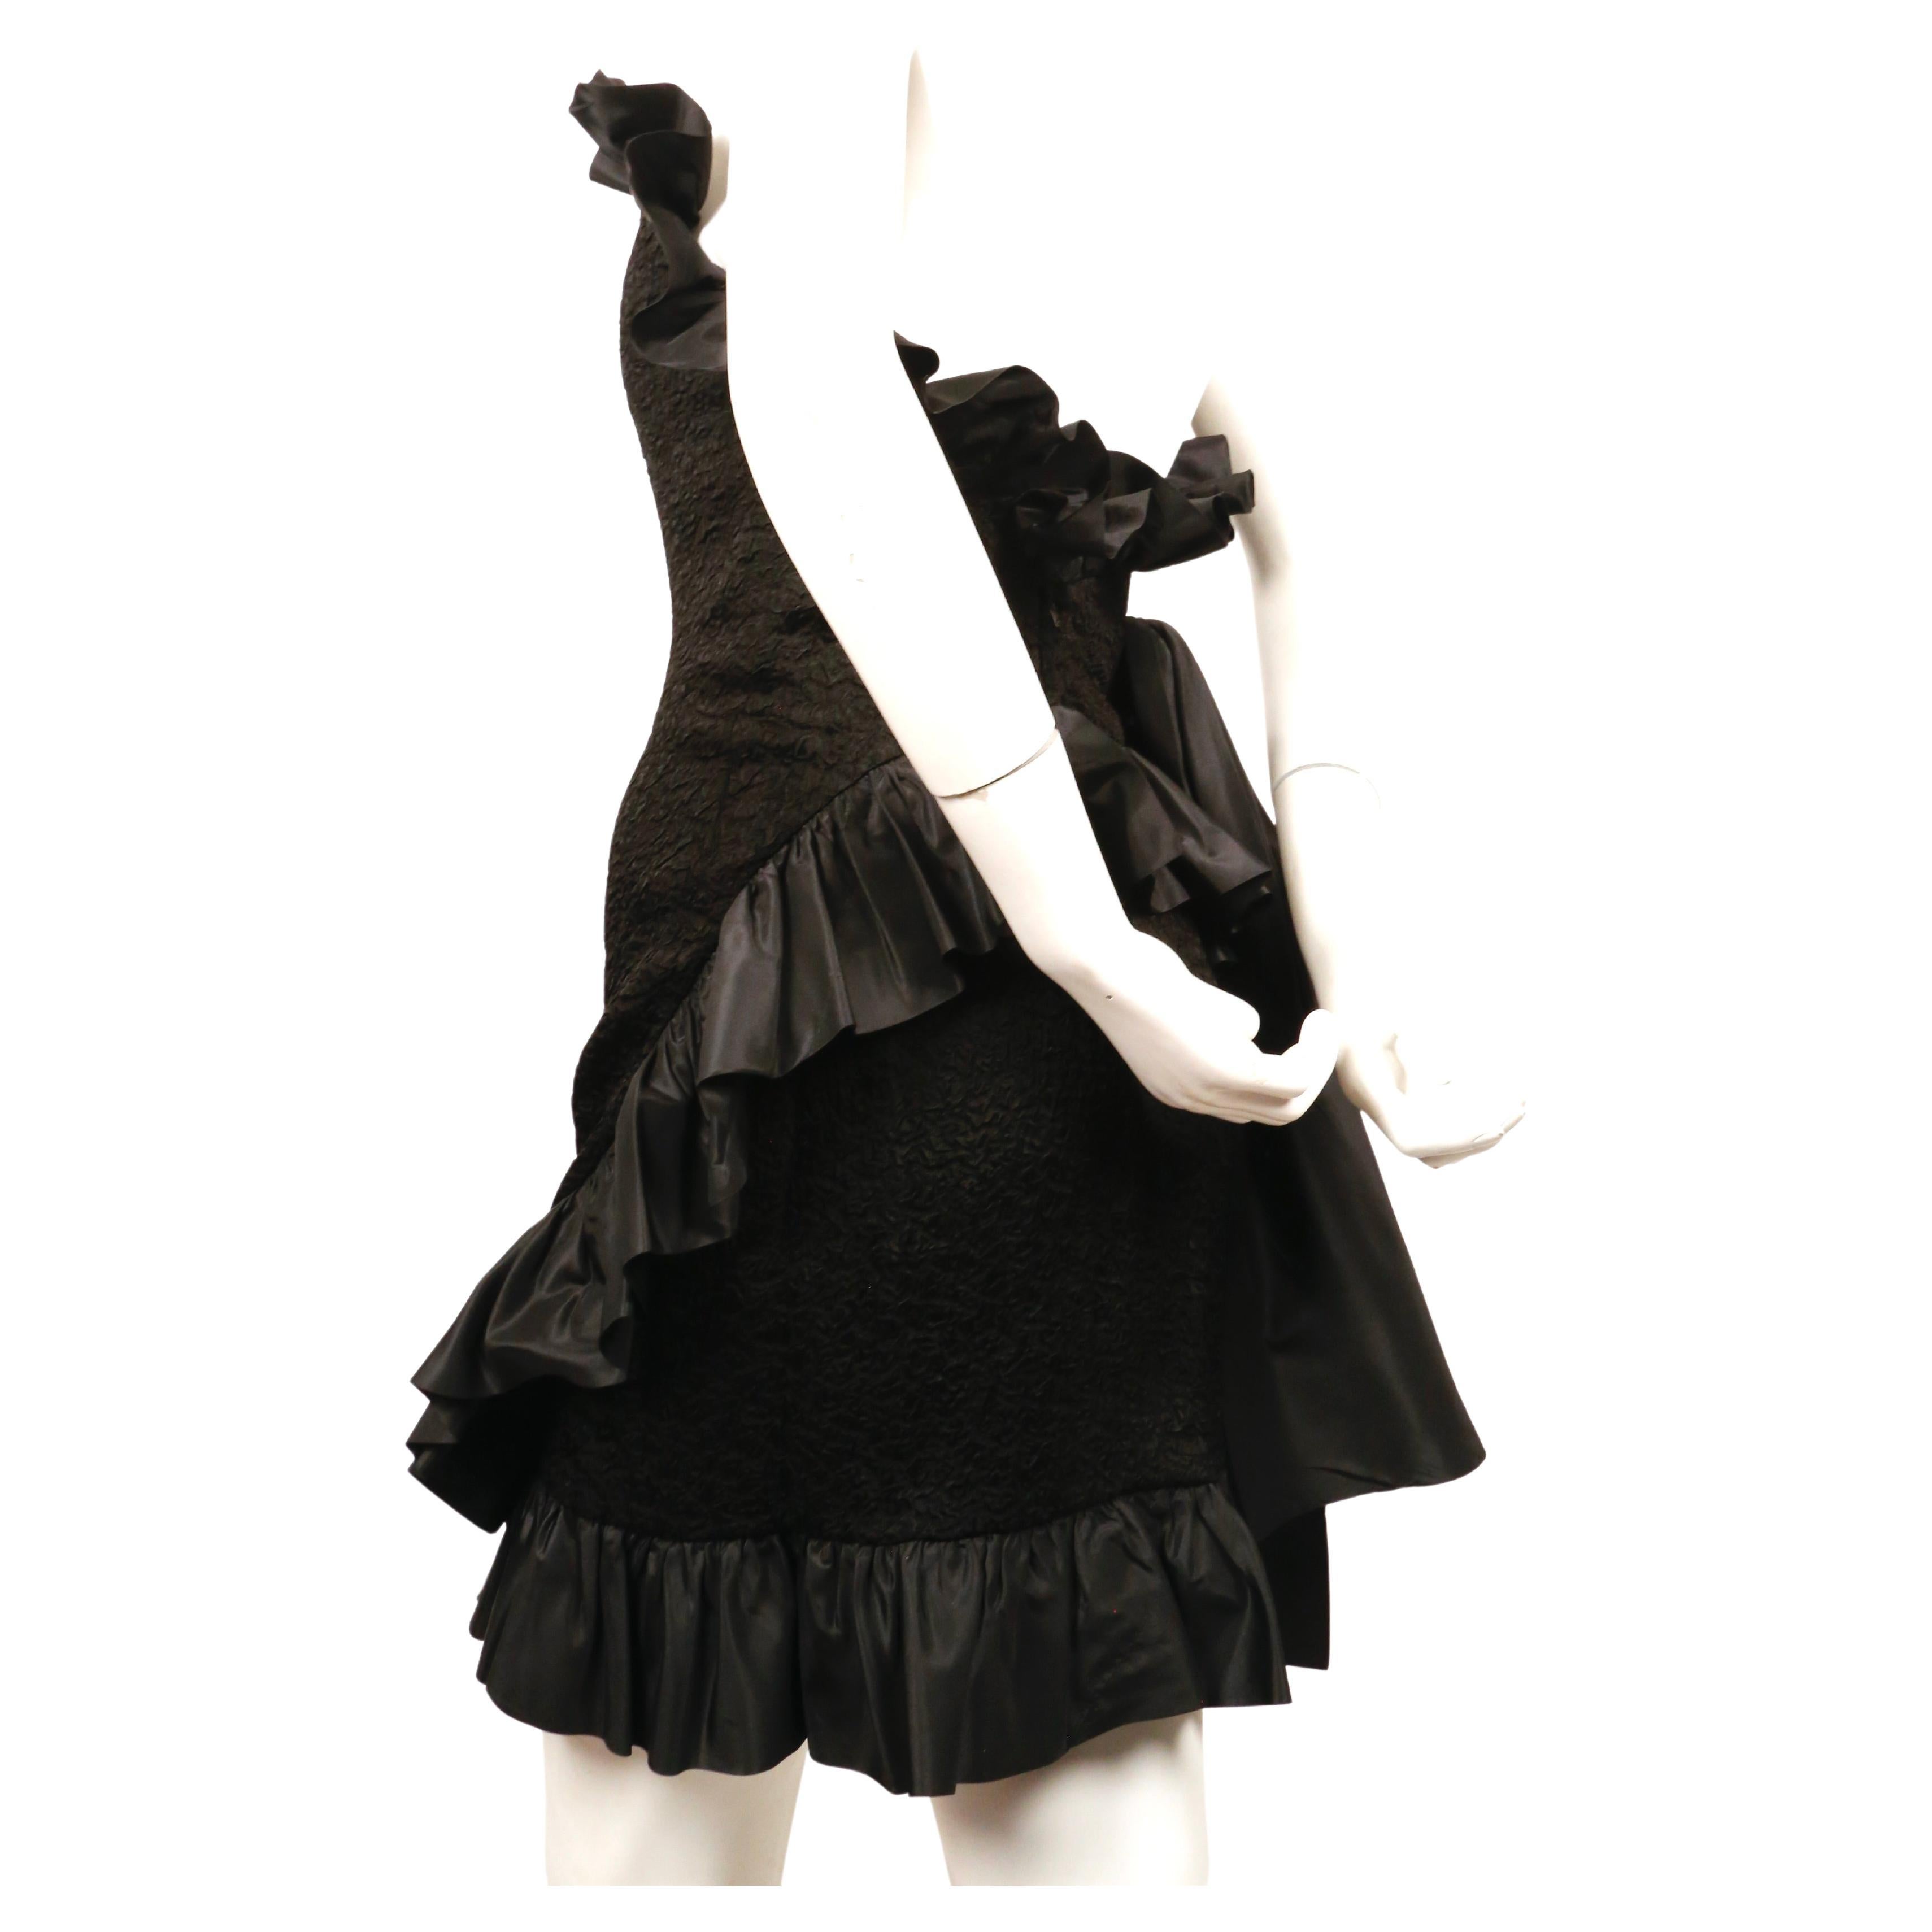 1980's YVES SAINT LAURENT black strapless dress with ruffles and bow For Sale 1